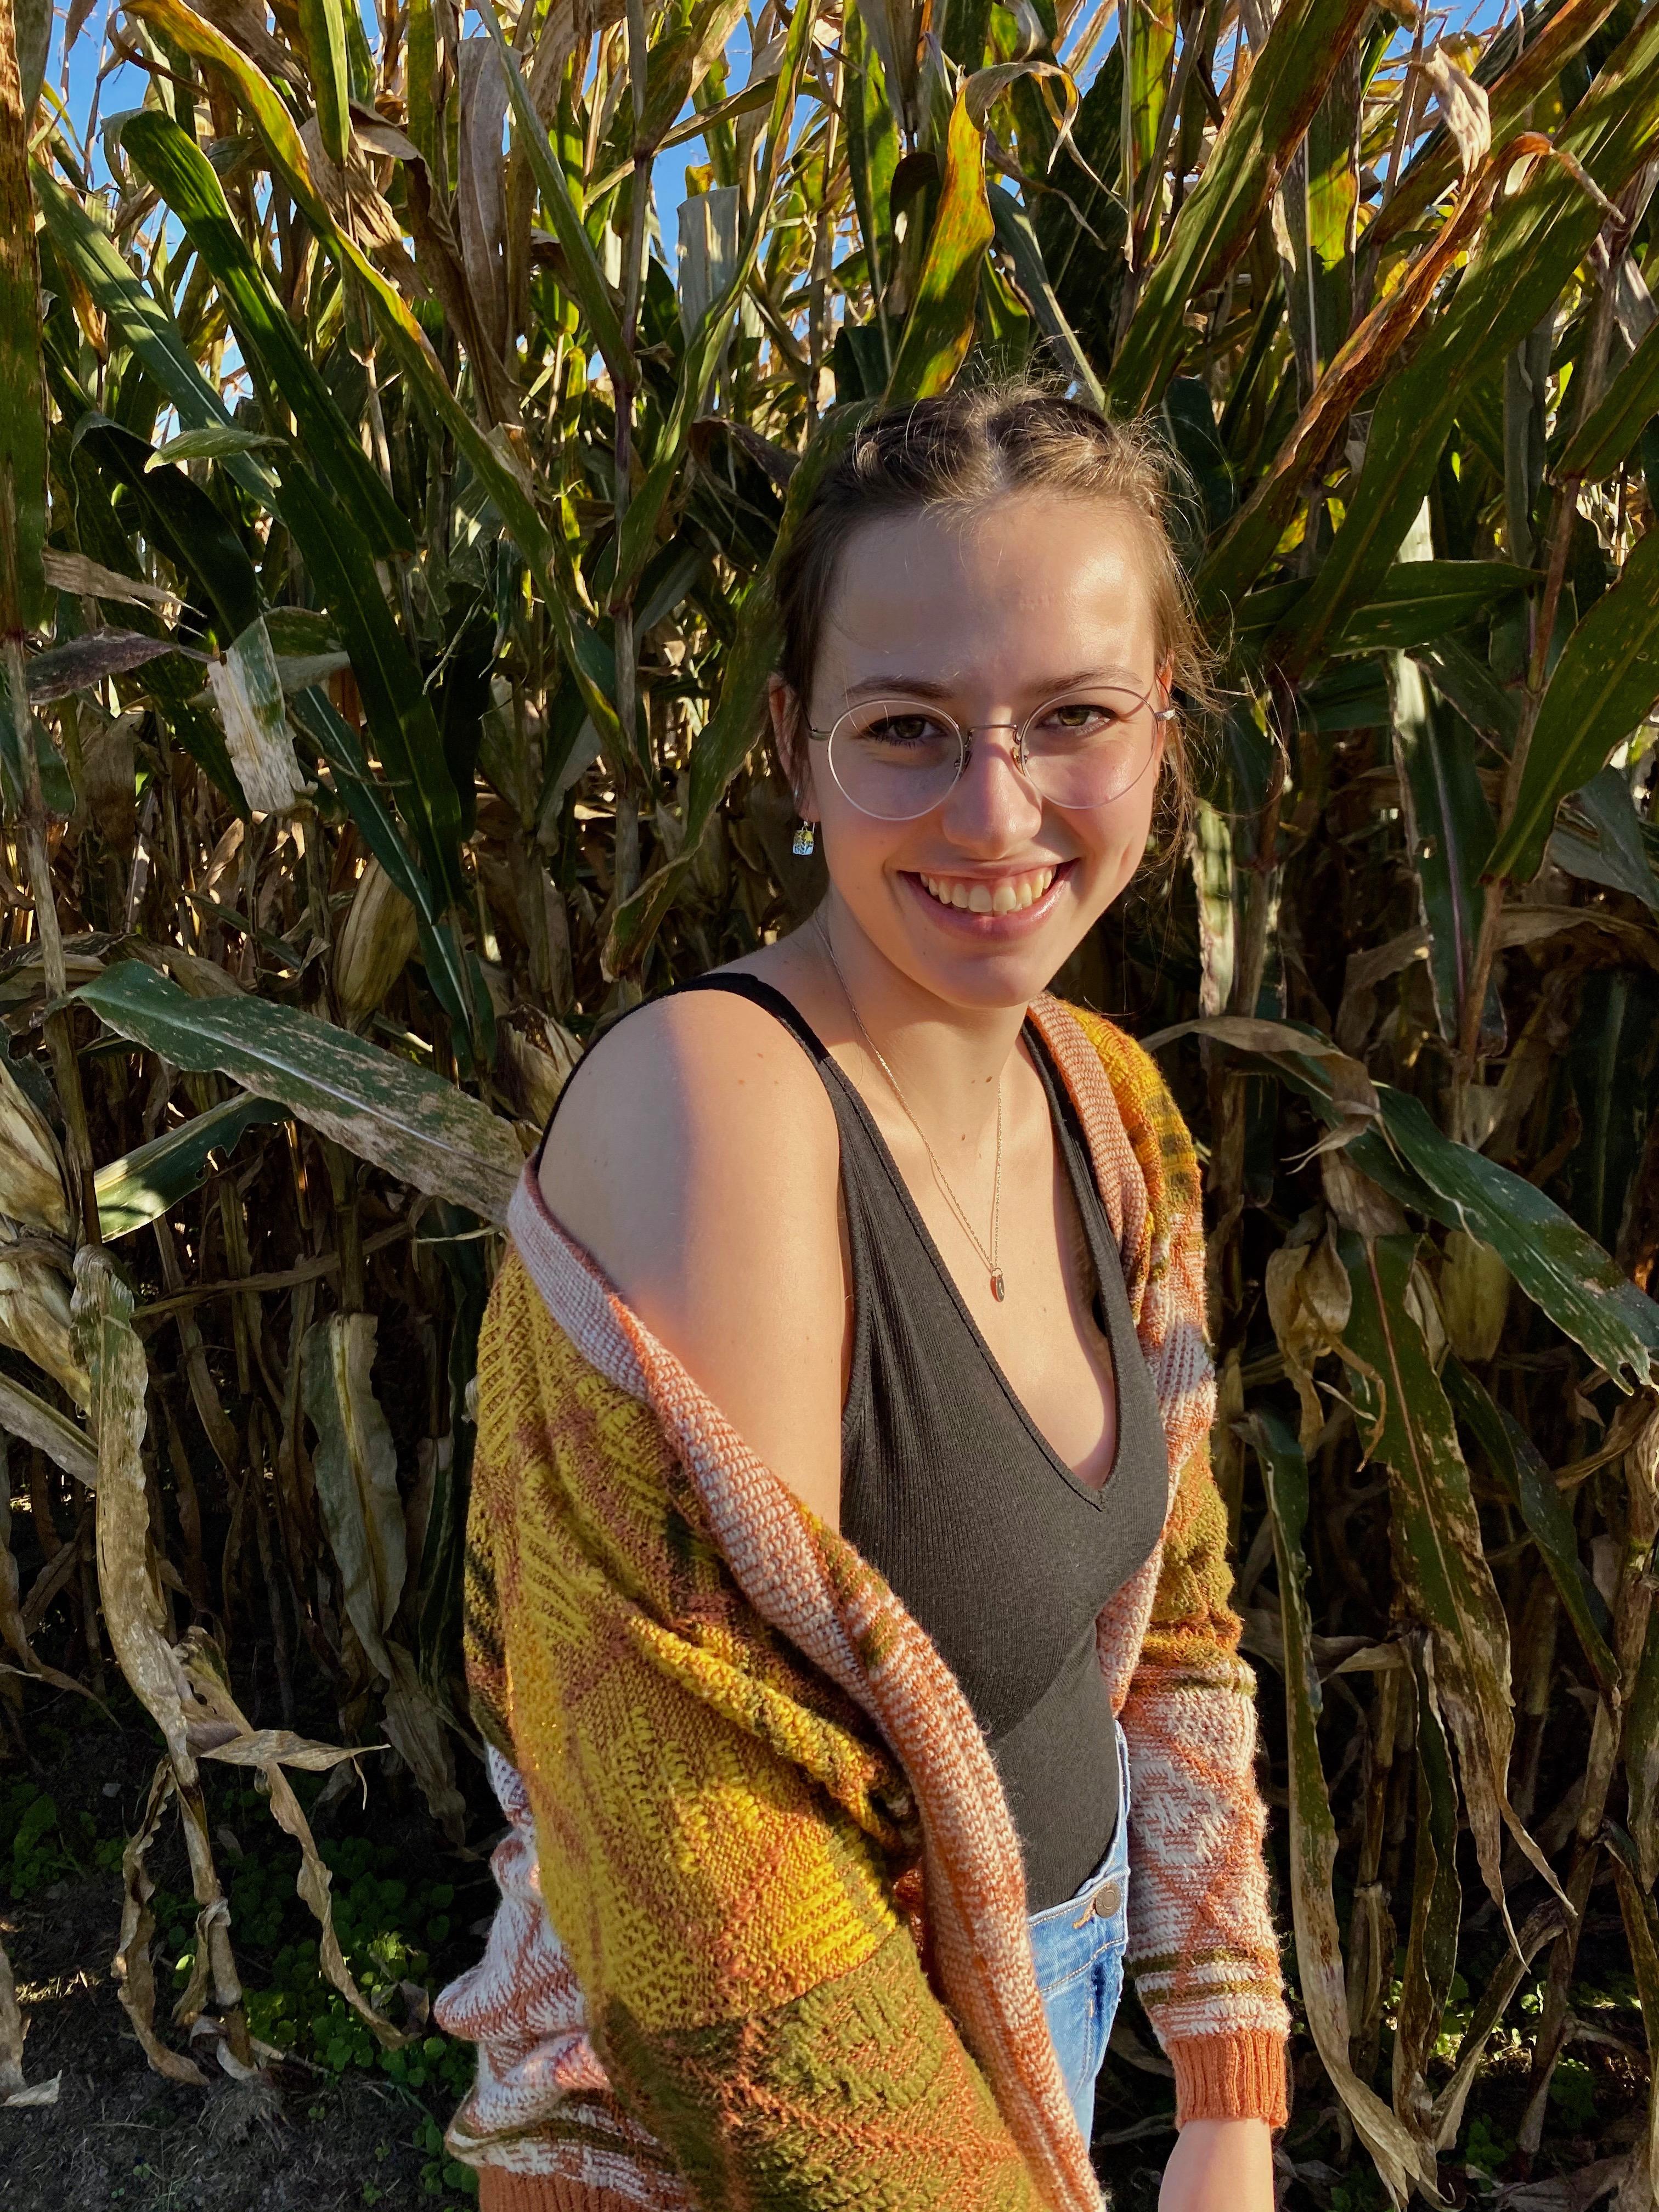 Sylvie, wearing a black shirt and multicolored cardigan, smiling with a field of corn behind her. 